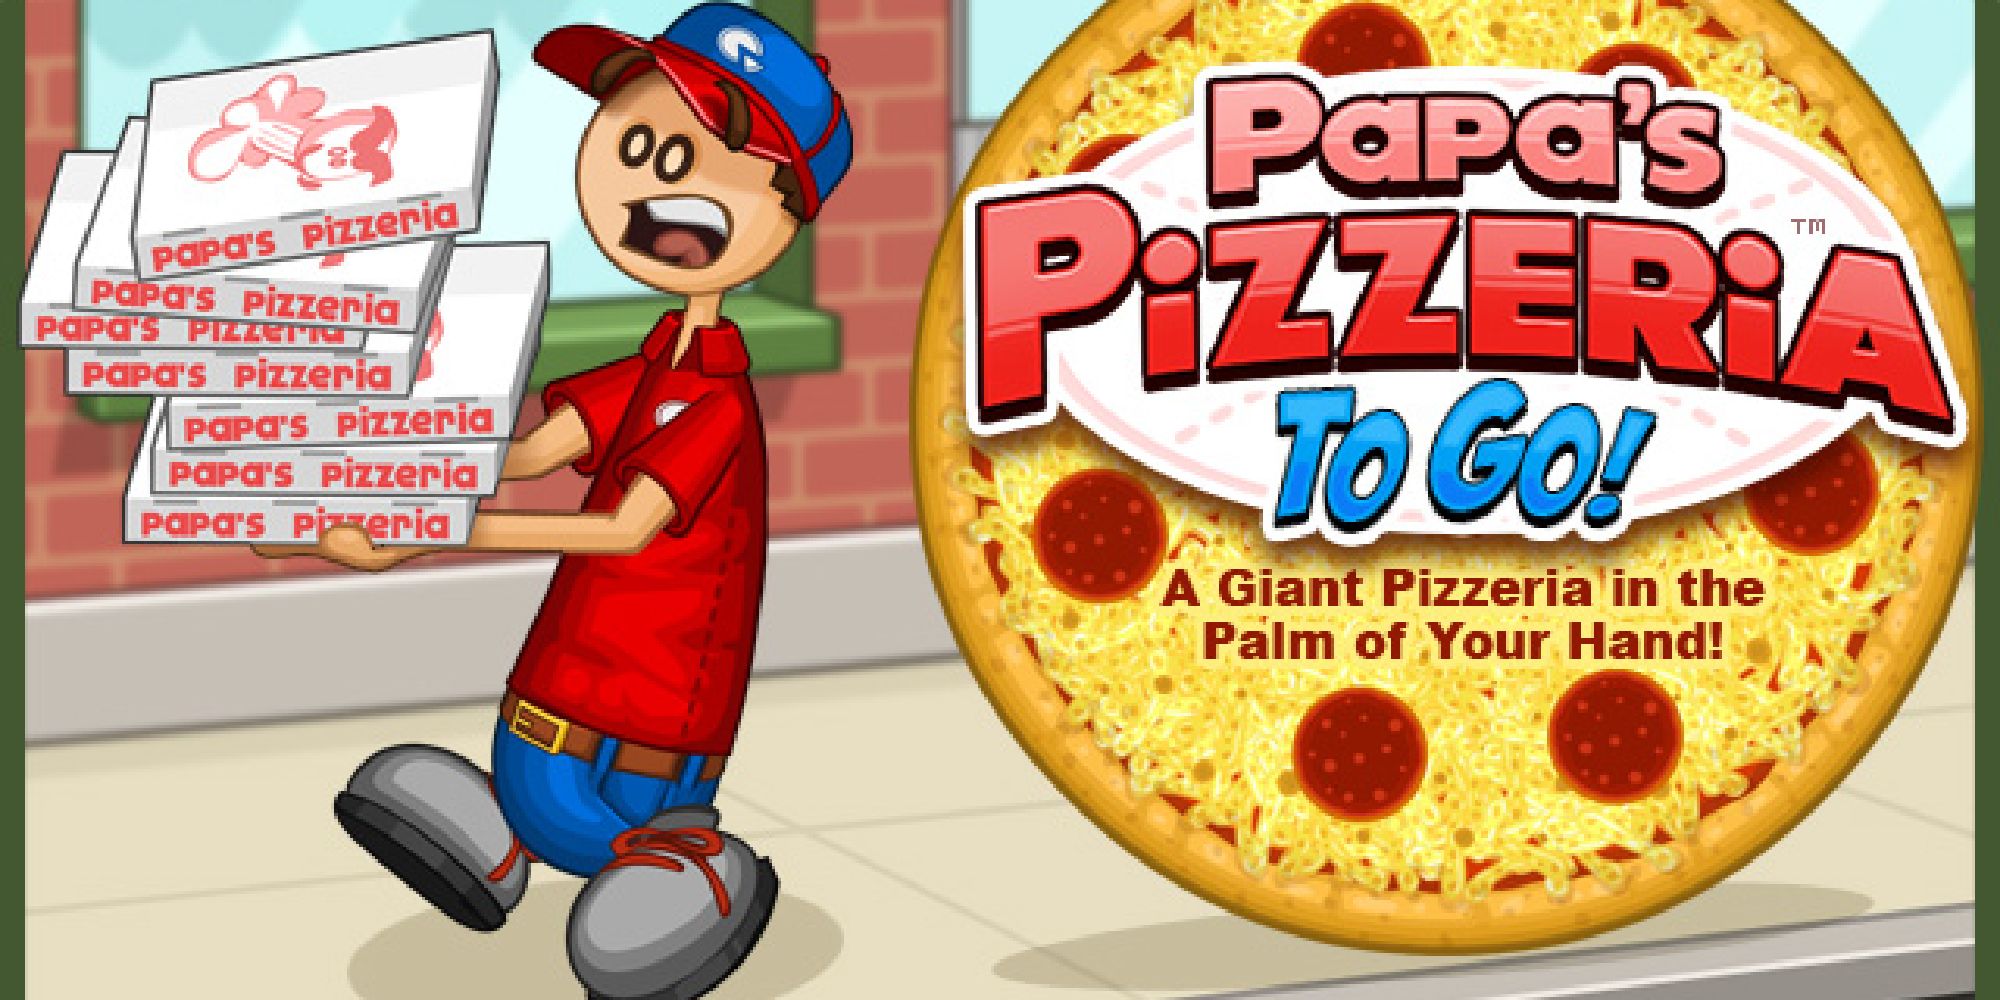 papas pizzeria to go promotional art showing pizza delivery